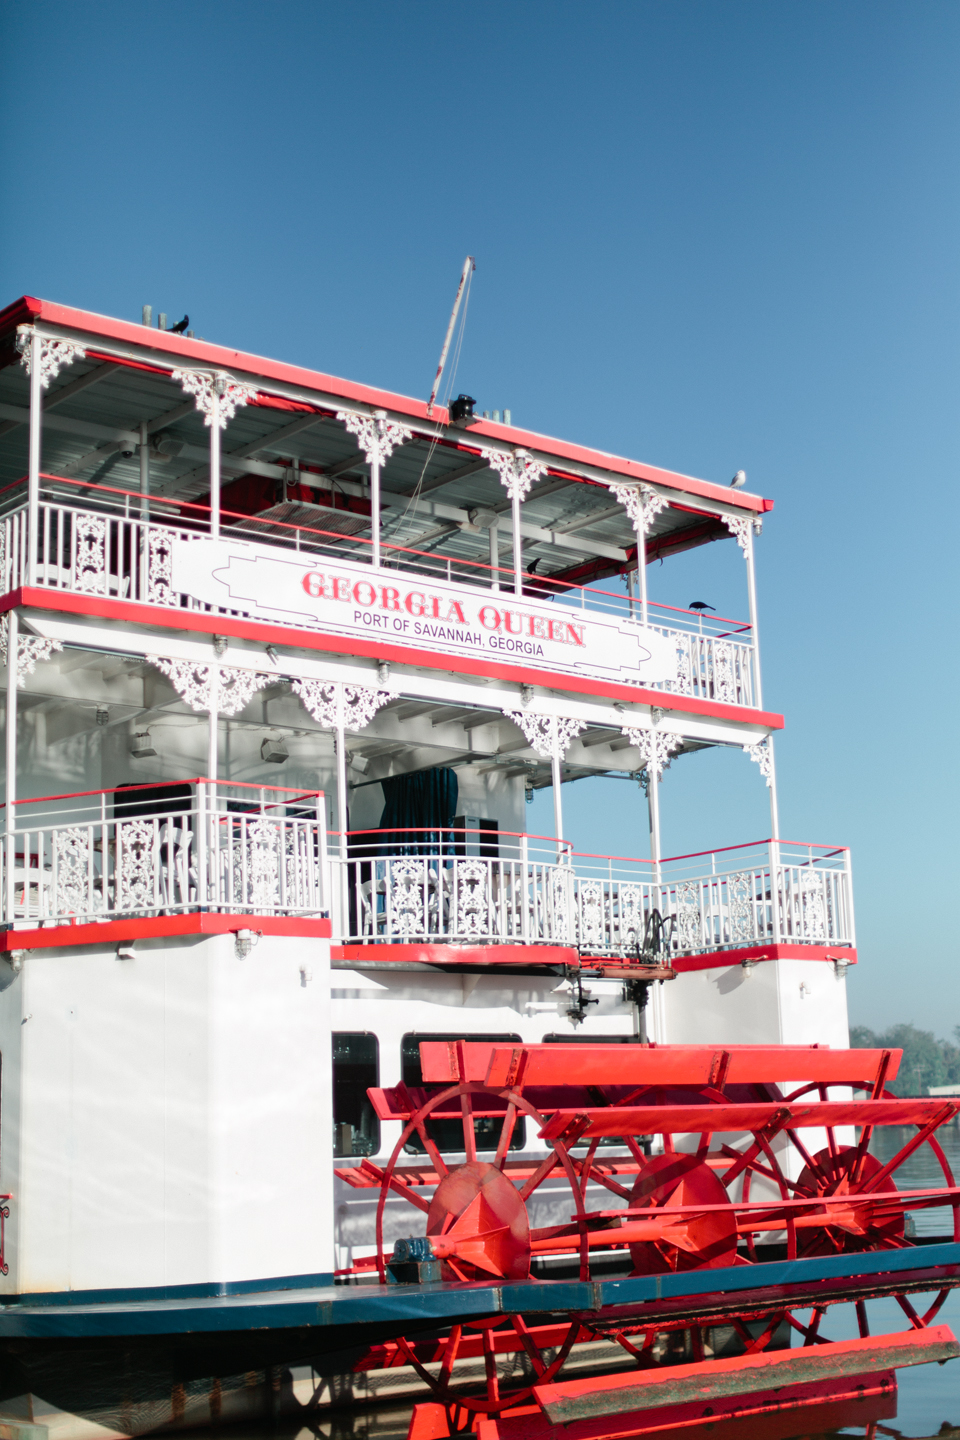 Picture of a white and red riverboat docked on East River Street in historic downtown Savannah, Georgia.